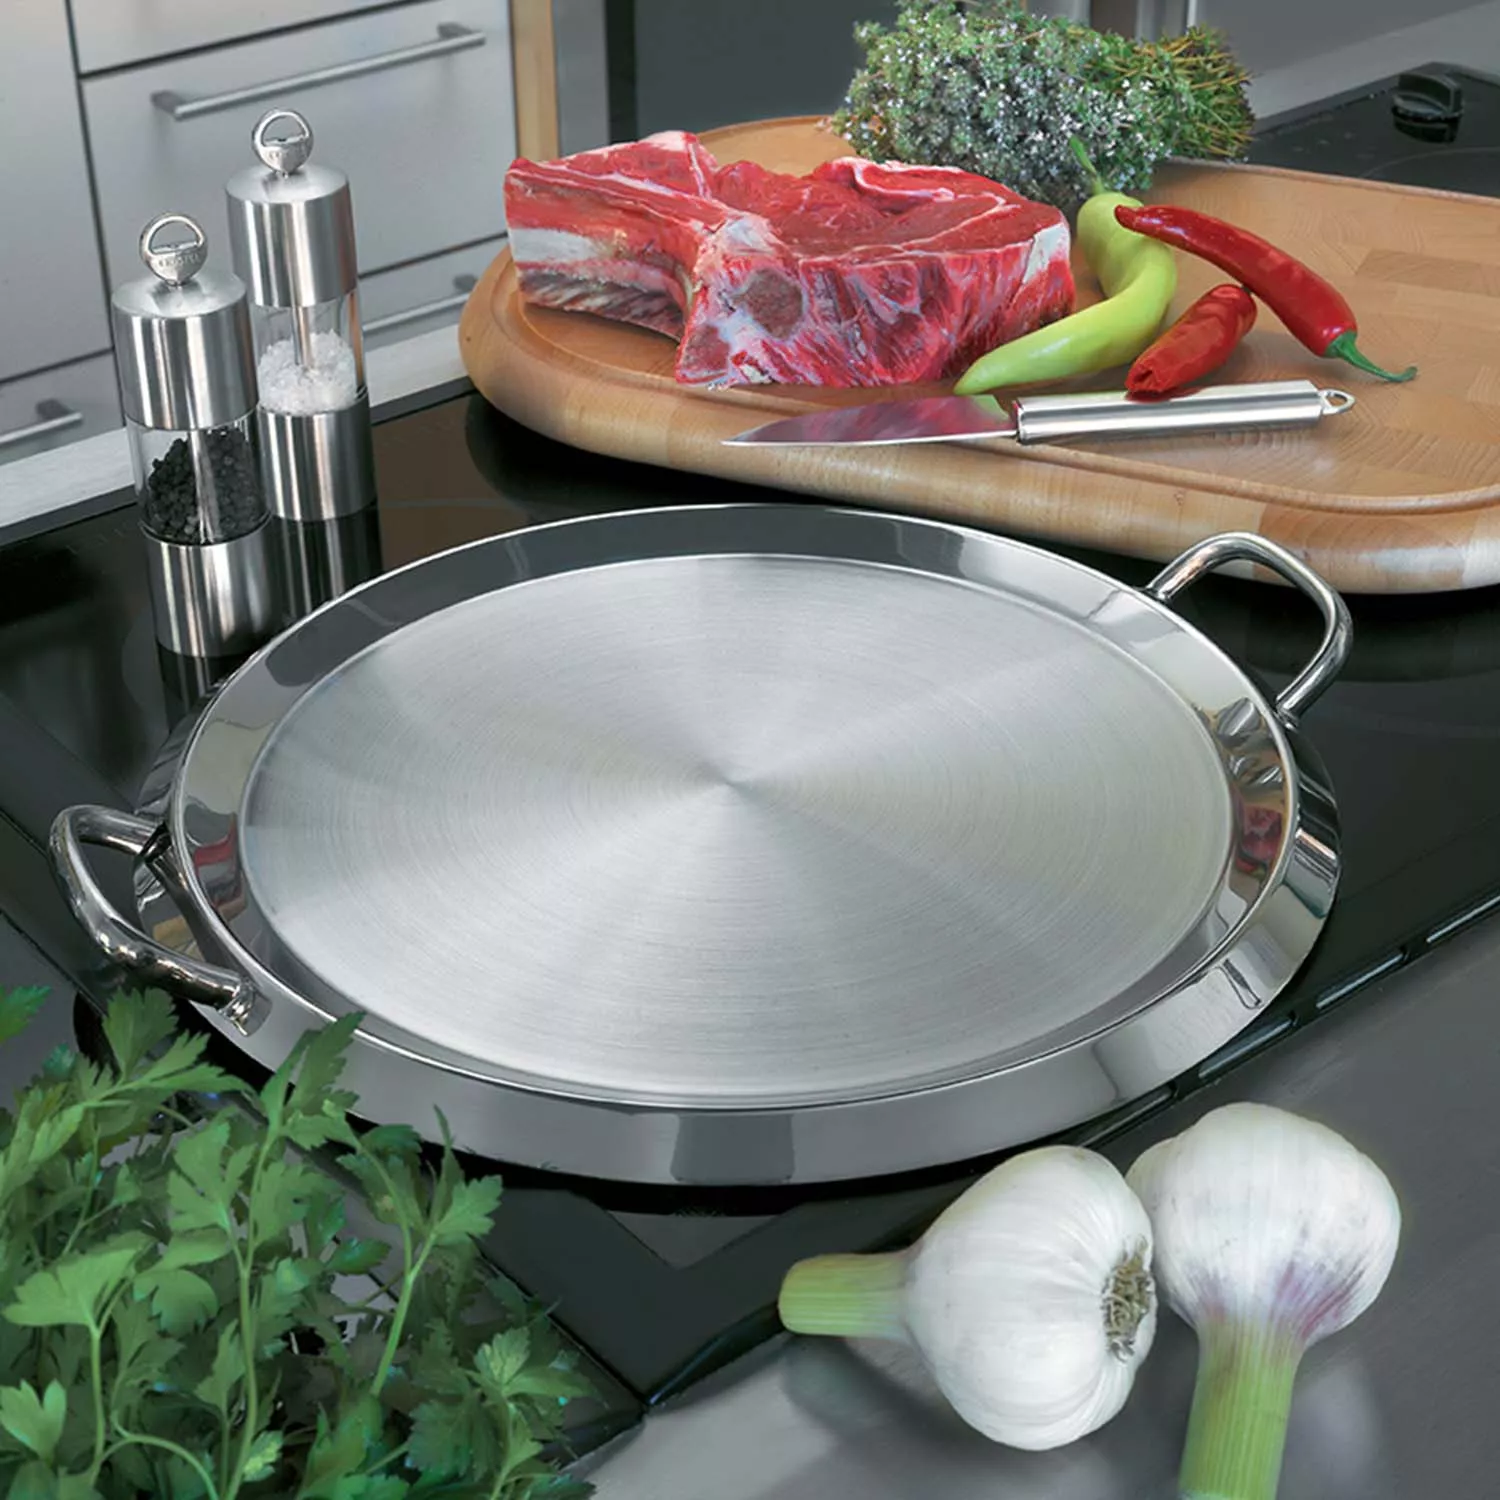 Cristel Stainless Steel Rondeau with Lid